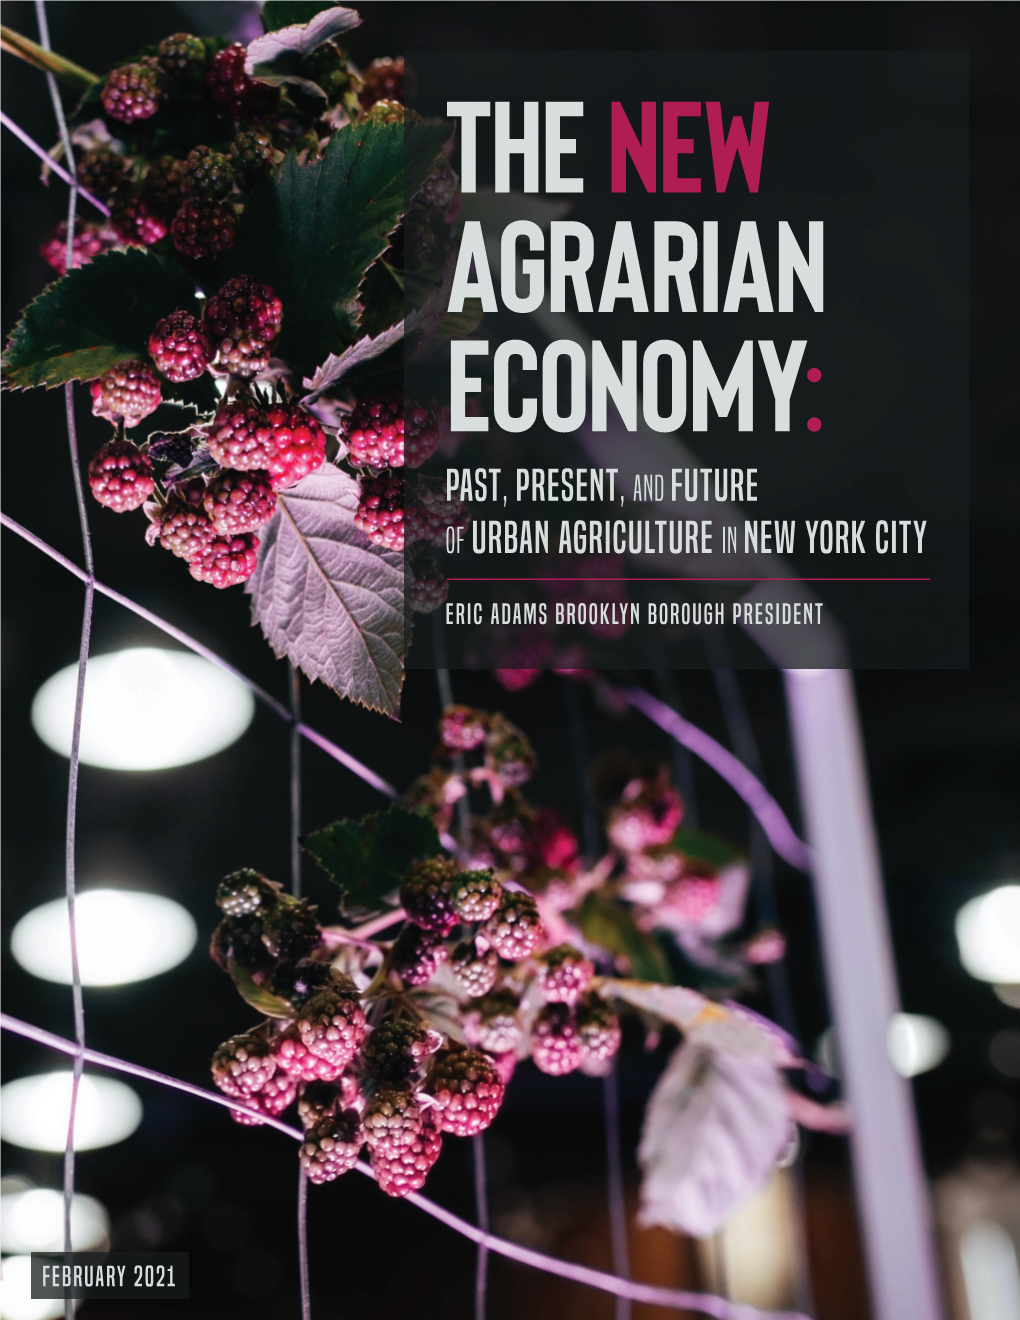 Past, Present, and Future of Urban Agriculture in New York City